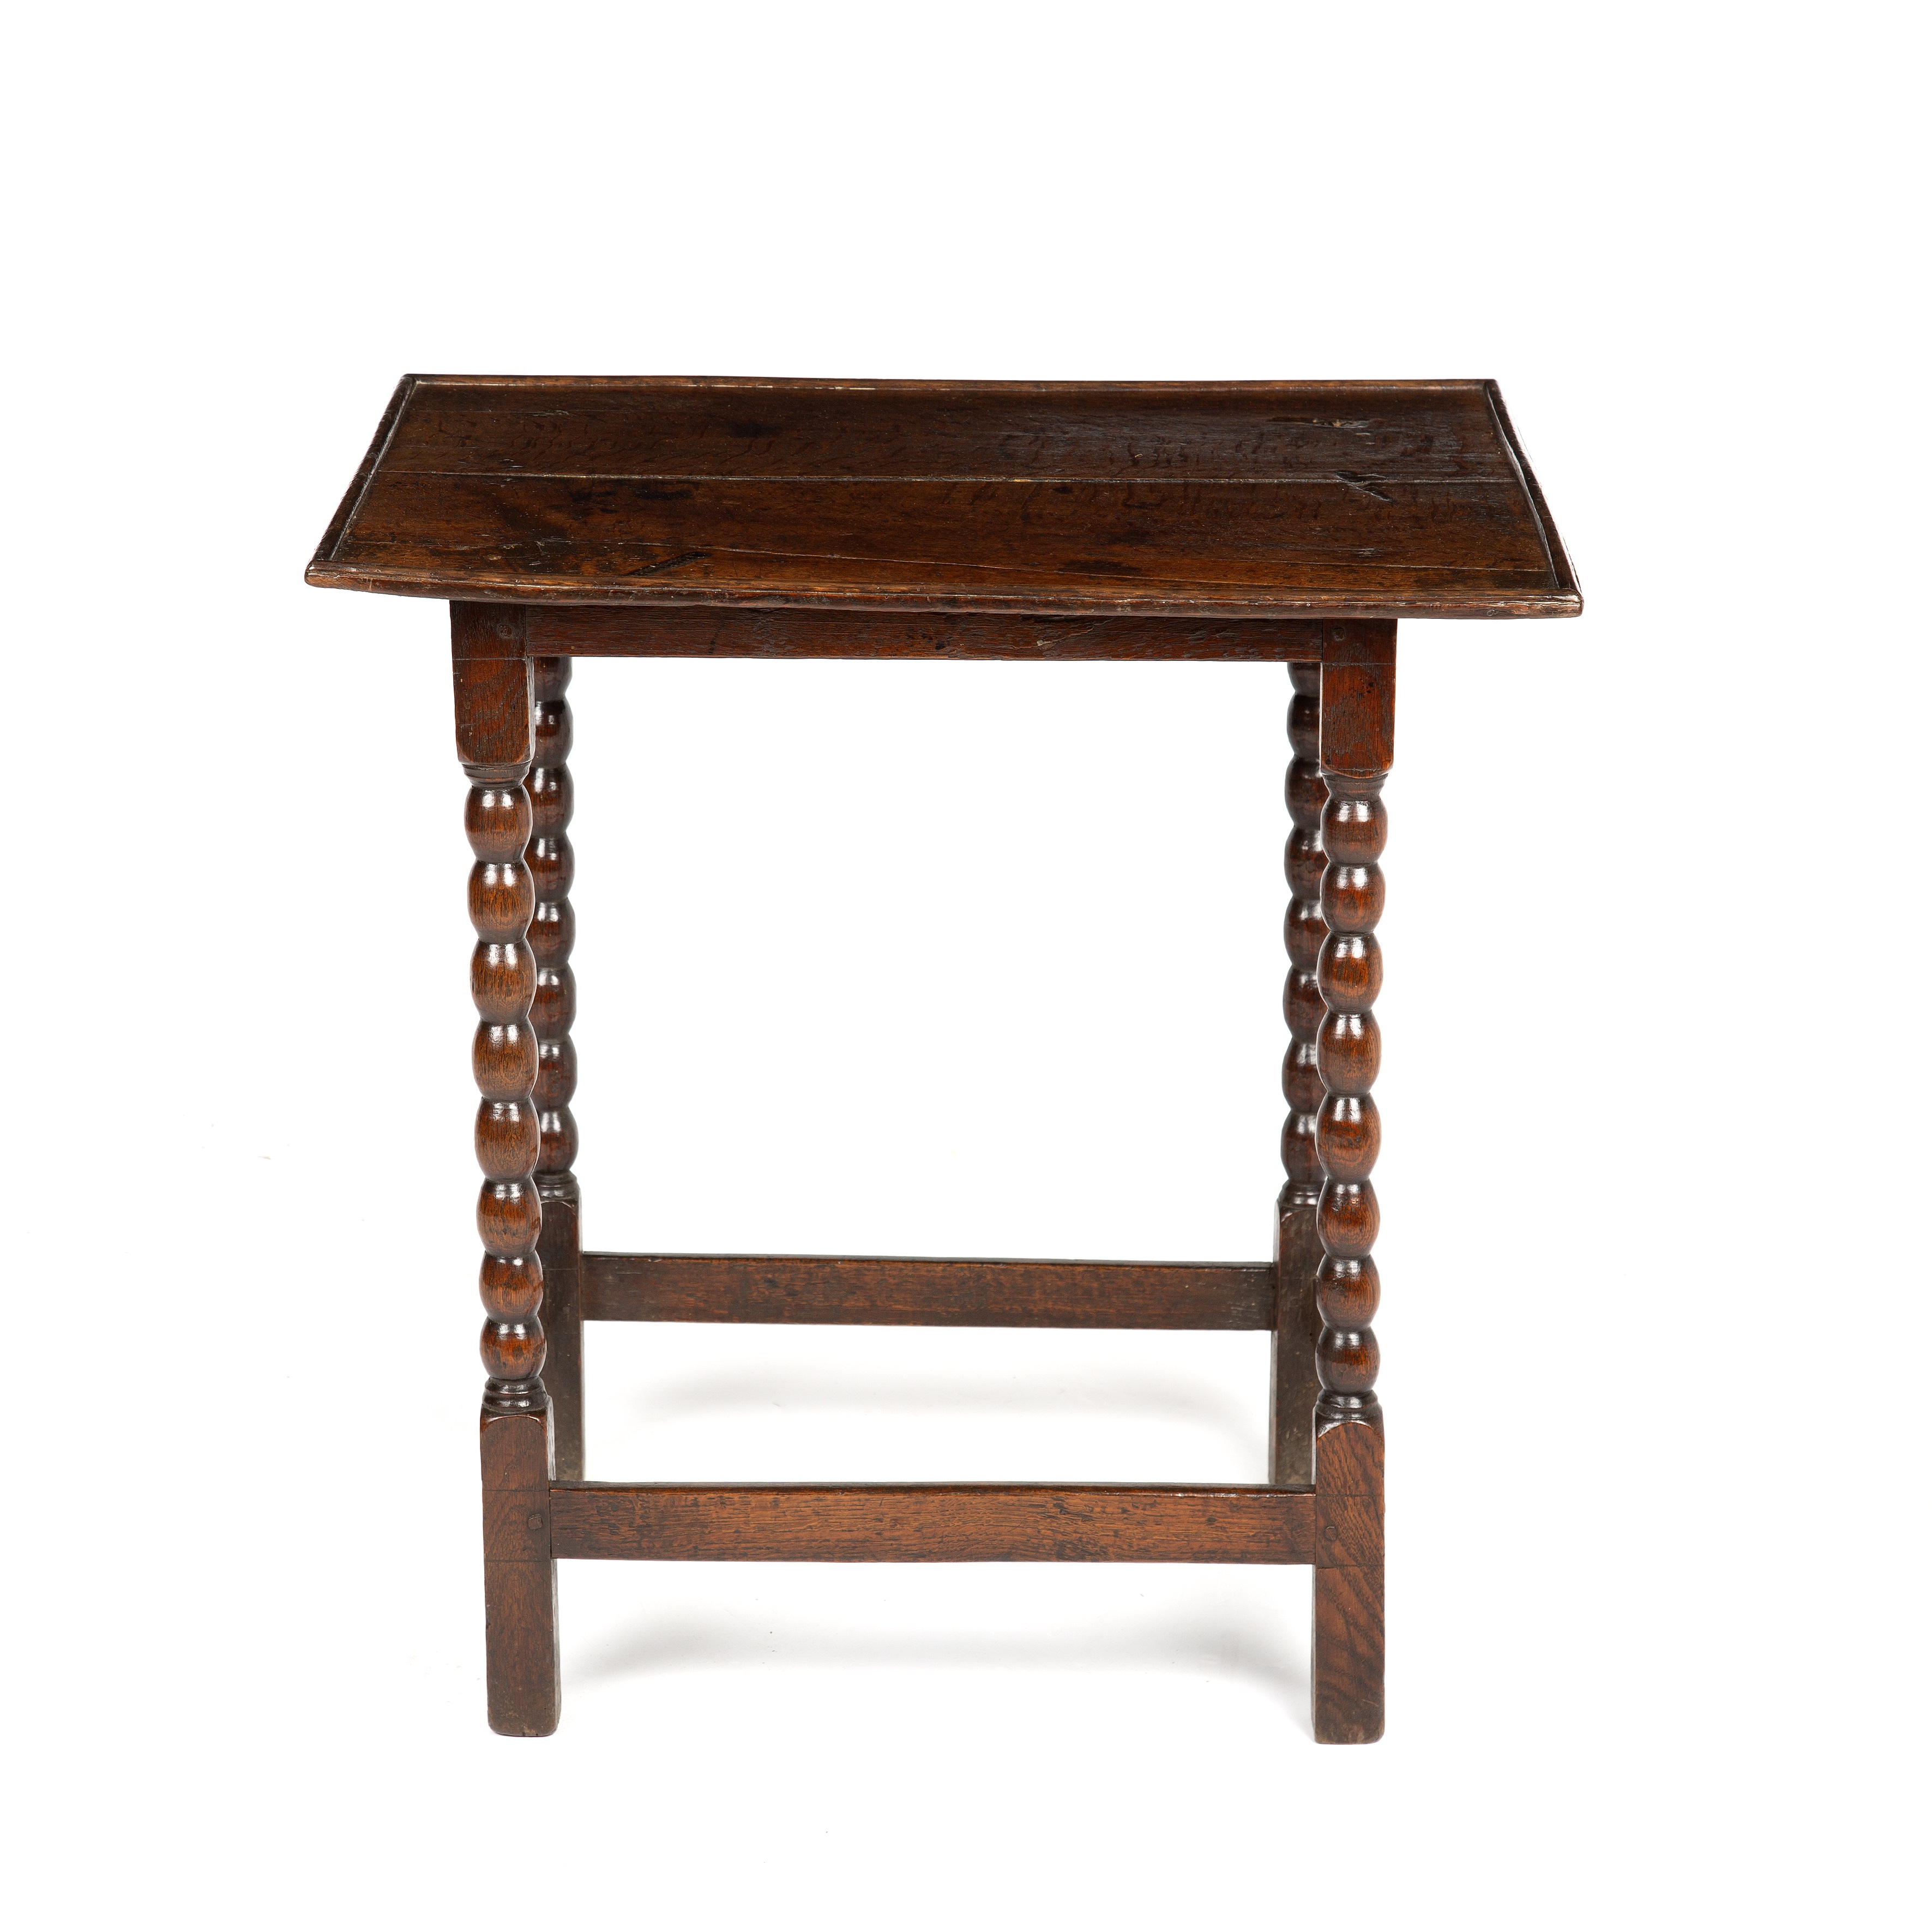 A Queen Anne oak table, with turned supports united by stretchers circa 1710, 61cm wide 41cm deep - Image 2 of 3